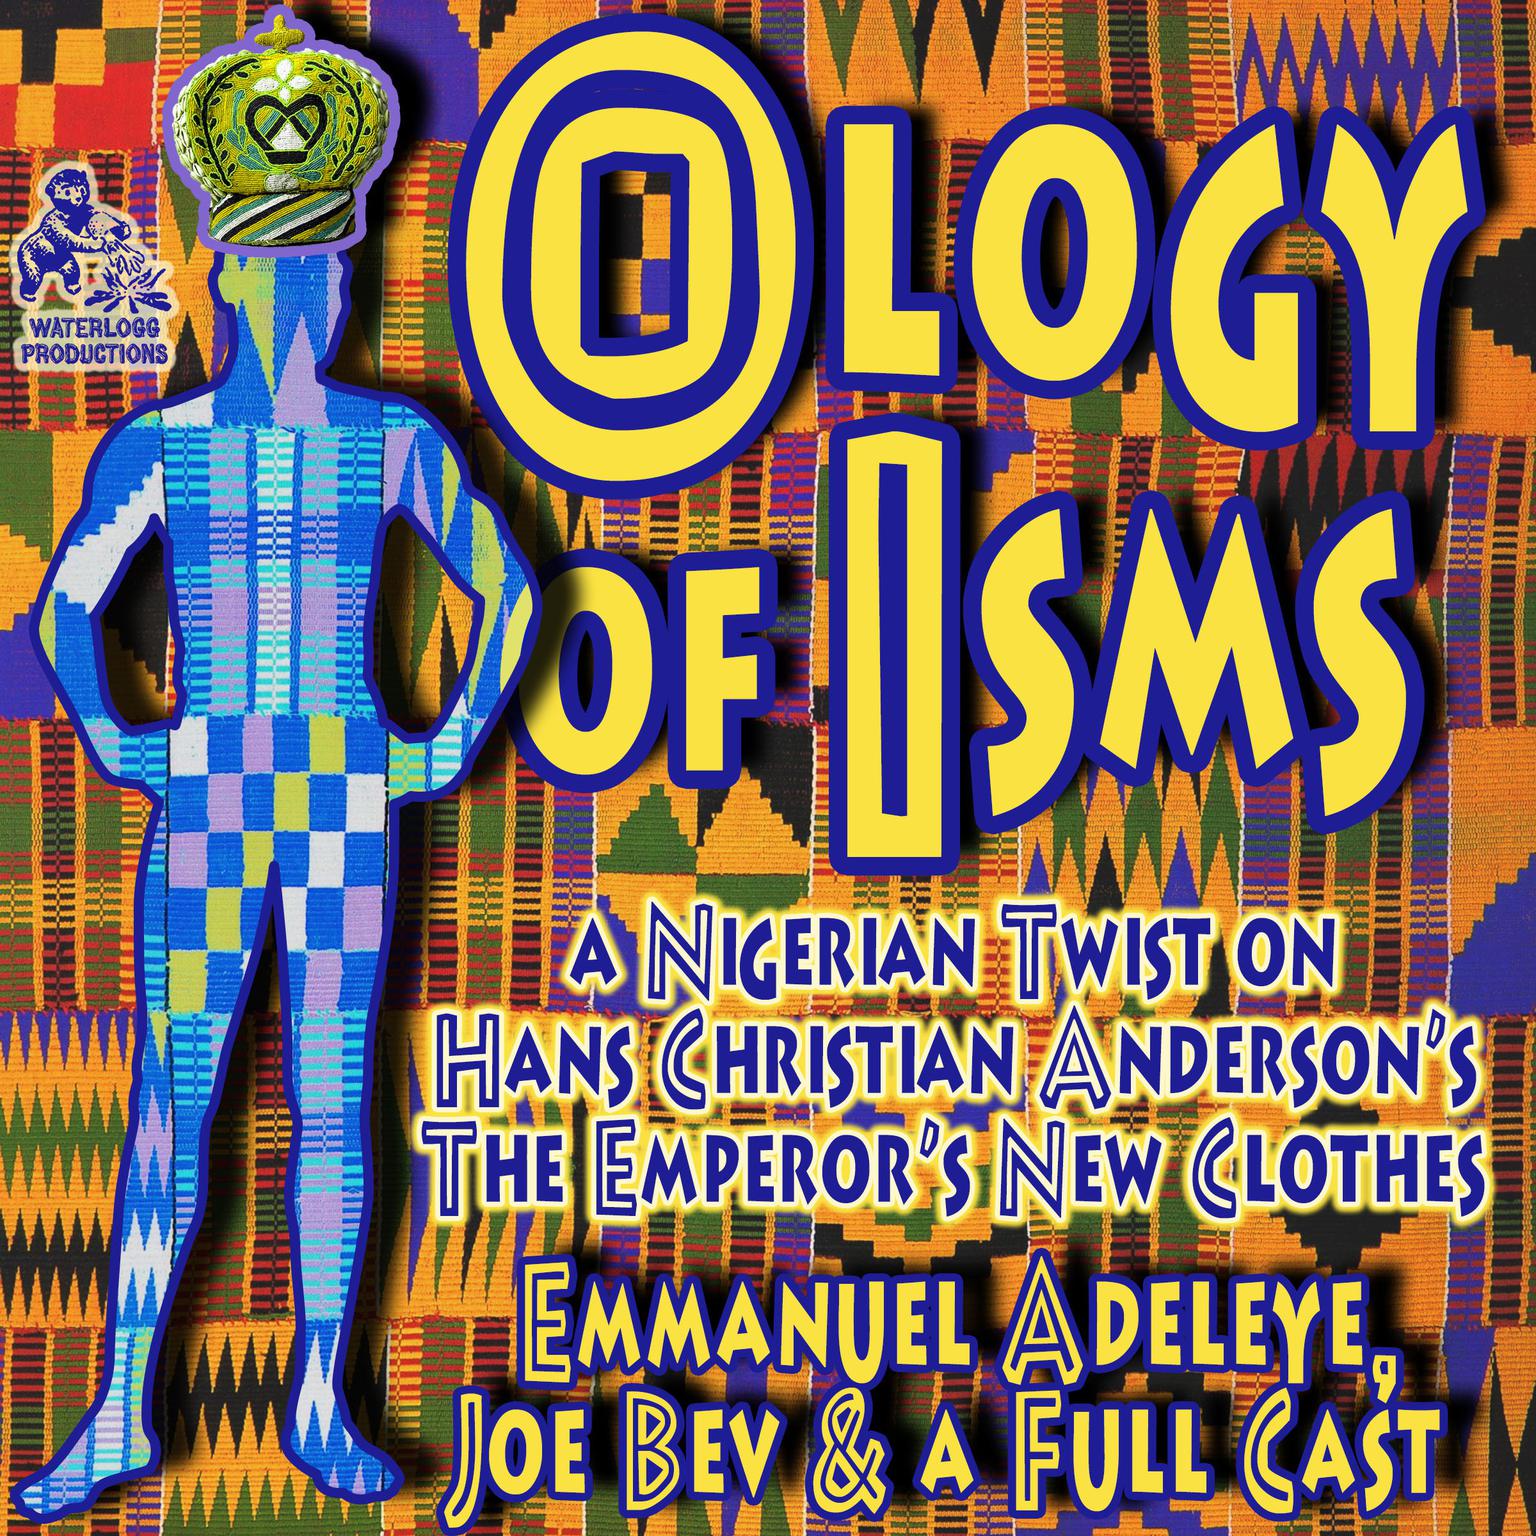 The Ology of Isms: A Nigerian Twist on The Emperor’s New Clothes Audiobook, by Emmanuel Adeleye